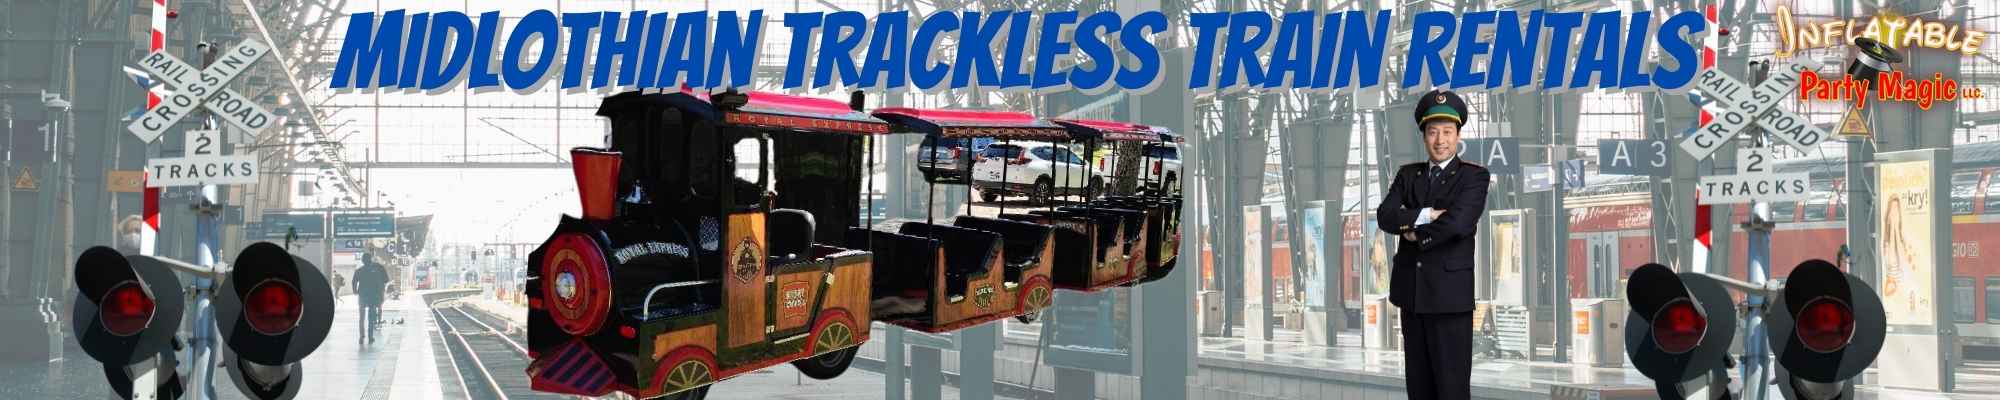 Trackless Train Rentals in Midlothian